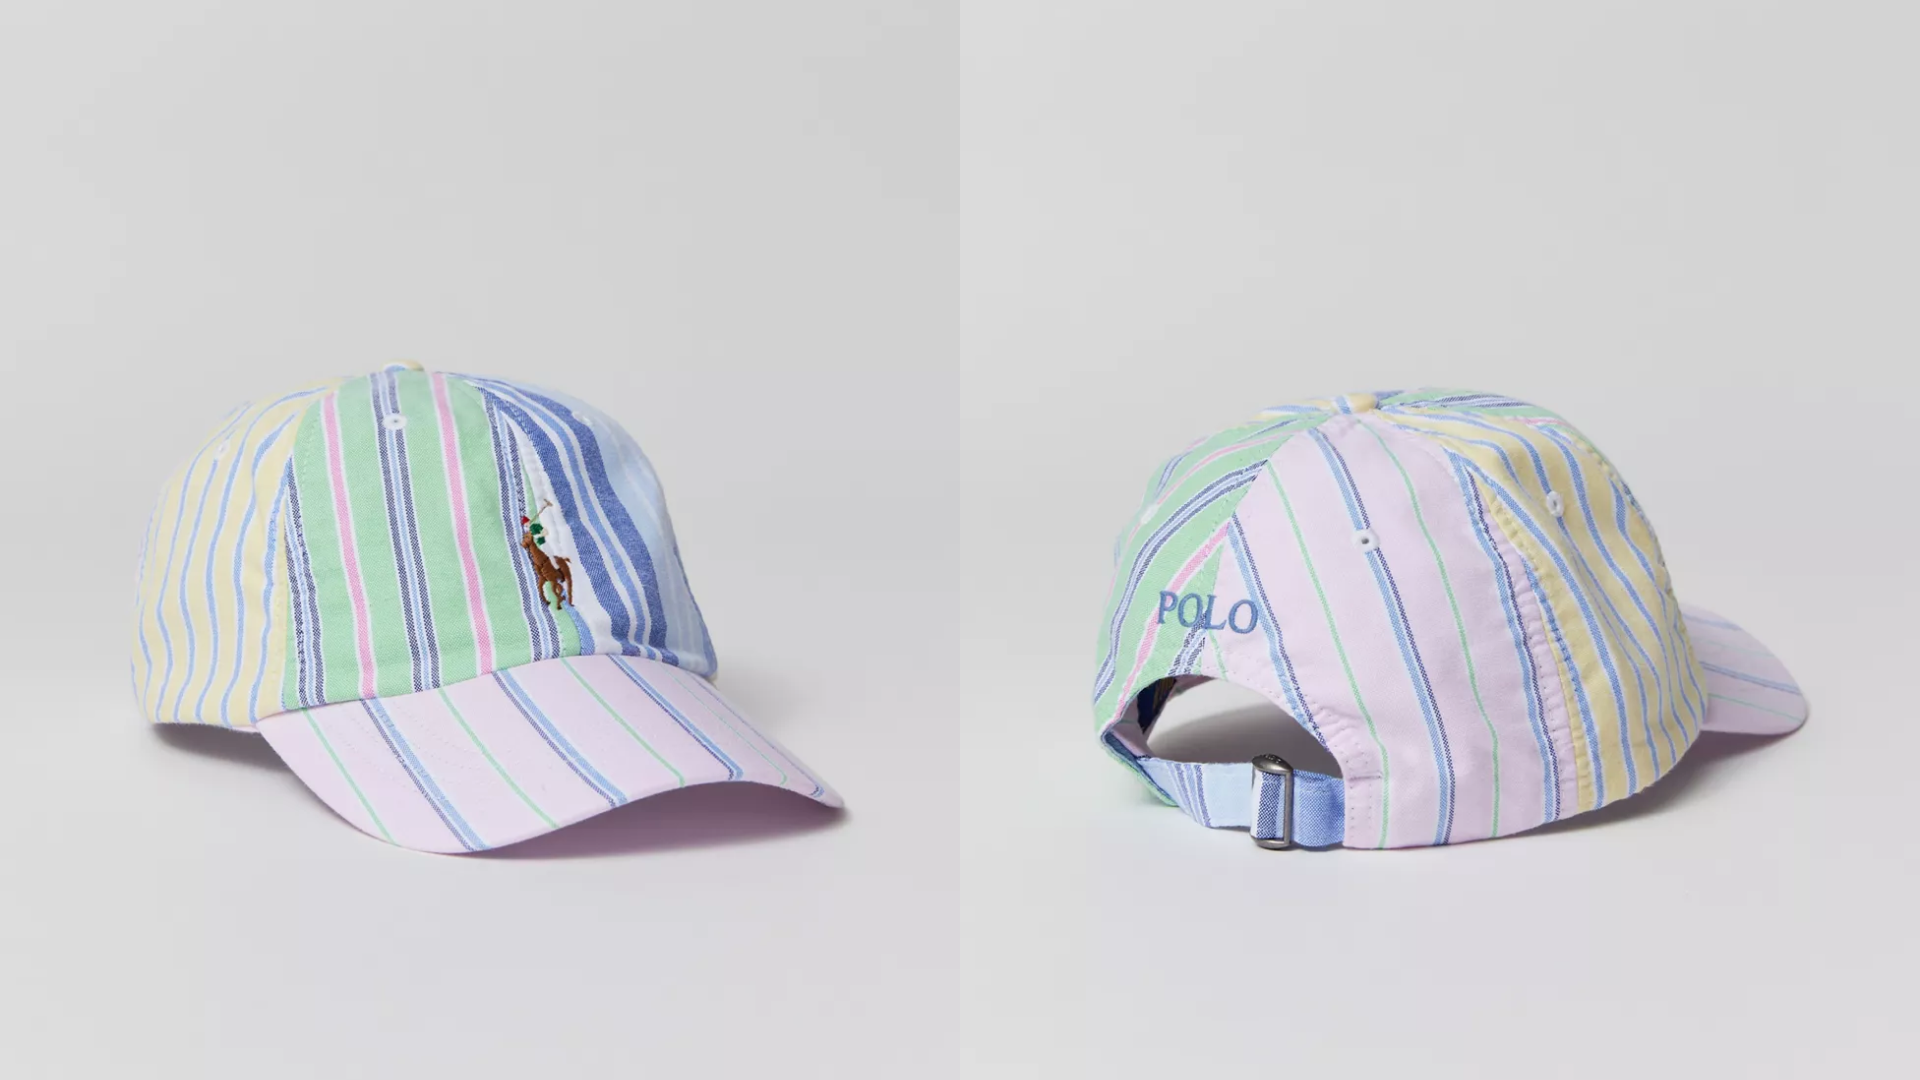 16 Summer Hats for Every Type of Situation